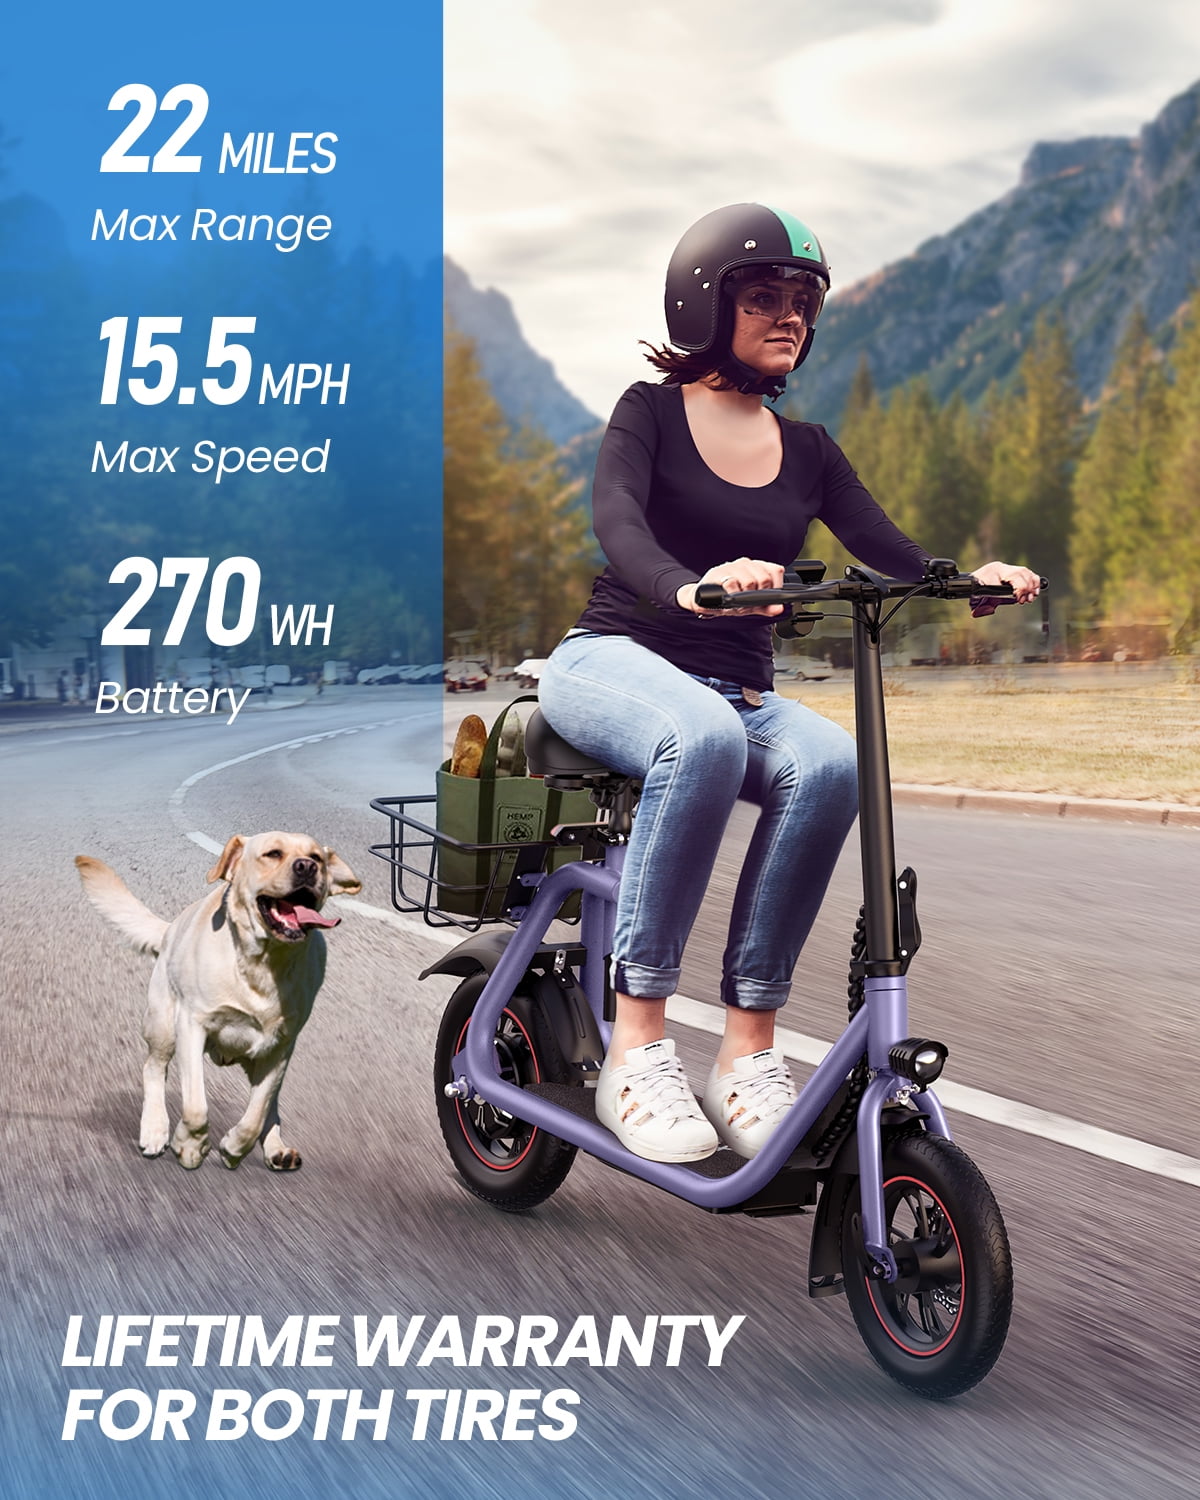 450W Max 22 Commuting with Powerful Electric Scooter Miles URBANMAX Seat, for C1 Speed Adult up to with Scooter for Electric Folding 15.5Mph, Basket-Purple Range, Motor Electric Scooter